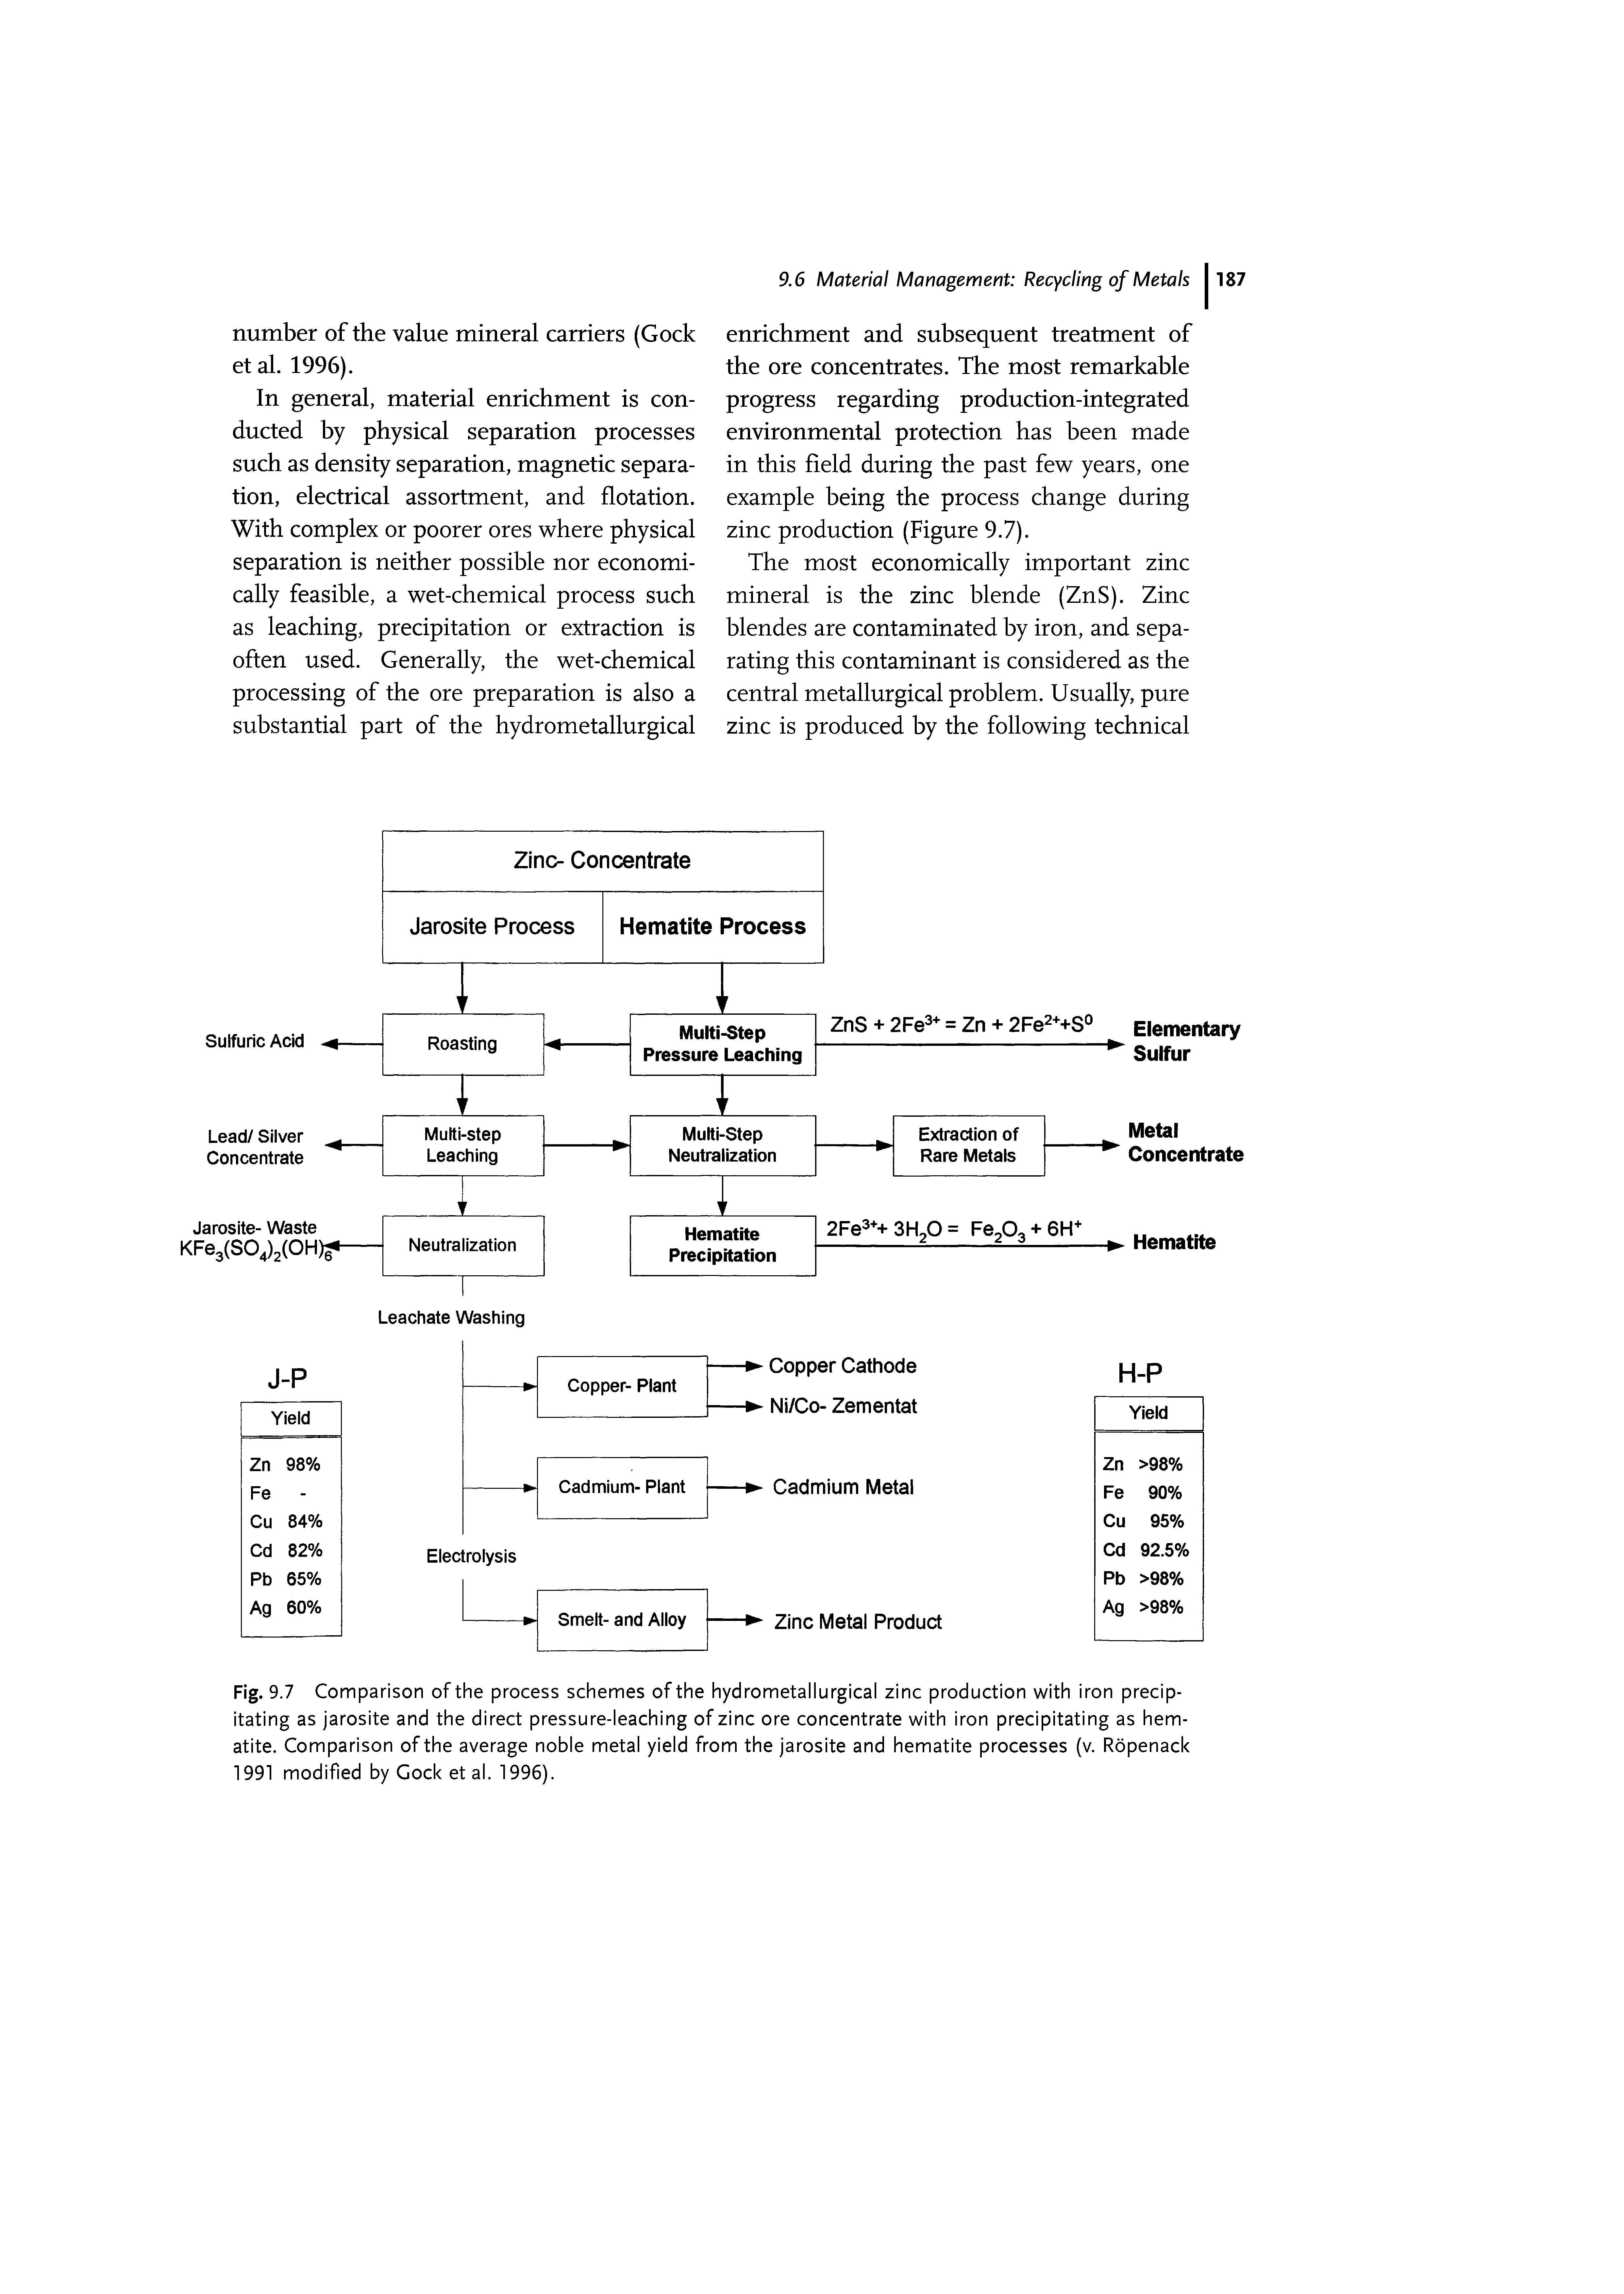 Fig. 9.7 Comparison of the process schemes of the hydrometallurgical zinc production with iron precipitating as jarosite and the direct pressure-leaching of zinc ore concentrate with iron precipitating as hematite. Comparison of the average noble metal yield from the jarosite and hematite processes (v. Ropenack 1991 modified by Gock et al. 1996).